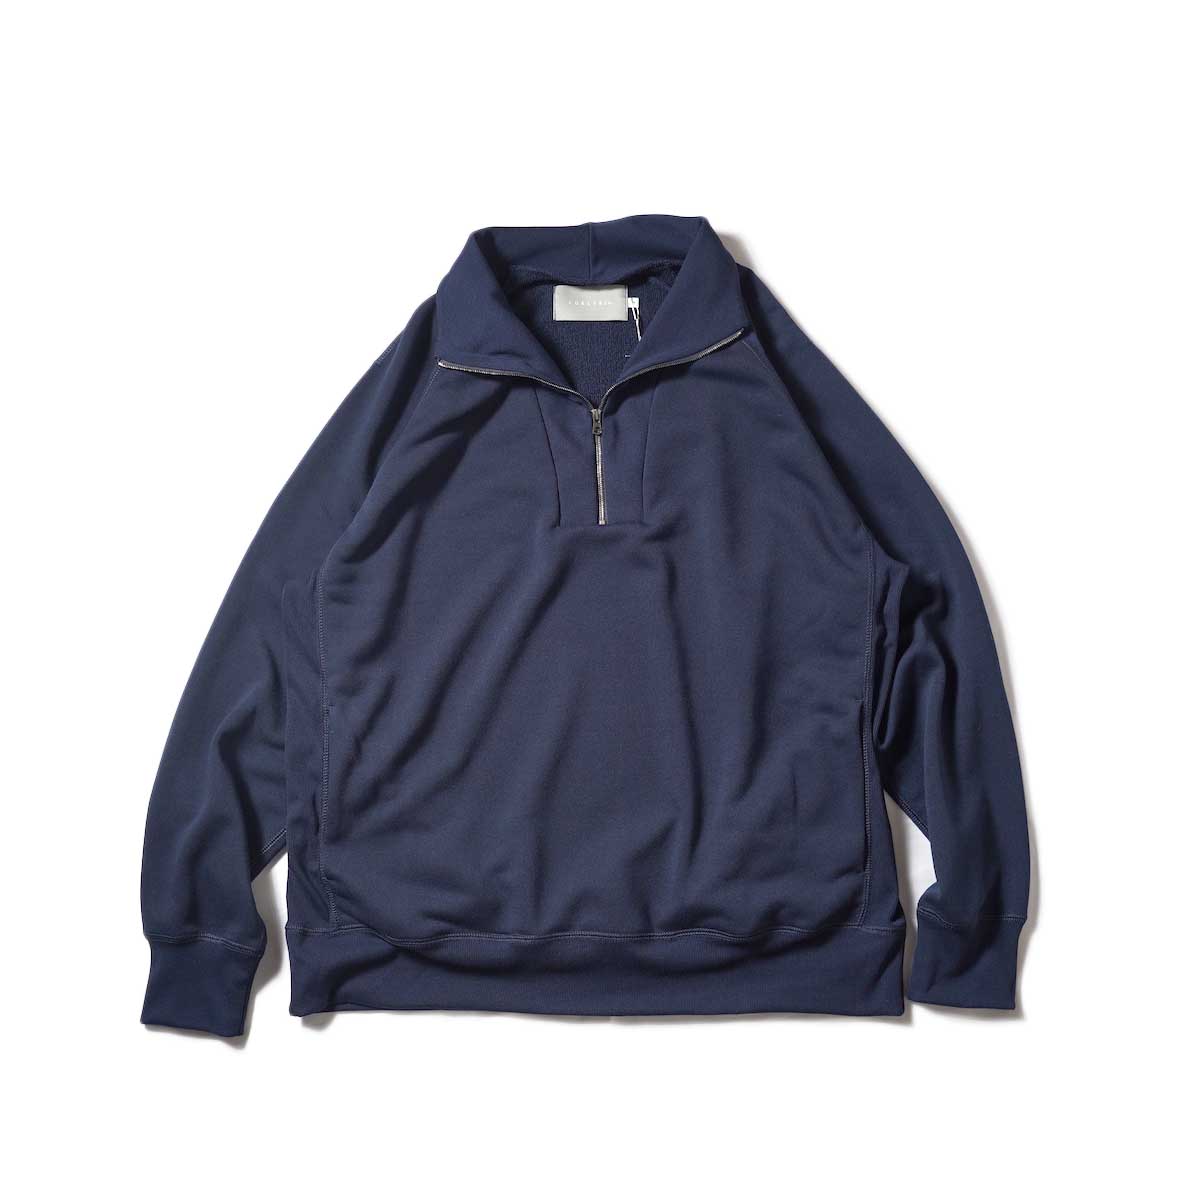 CURLY / DRY FRENCH TERRY HALF ZIP (Navy)